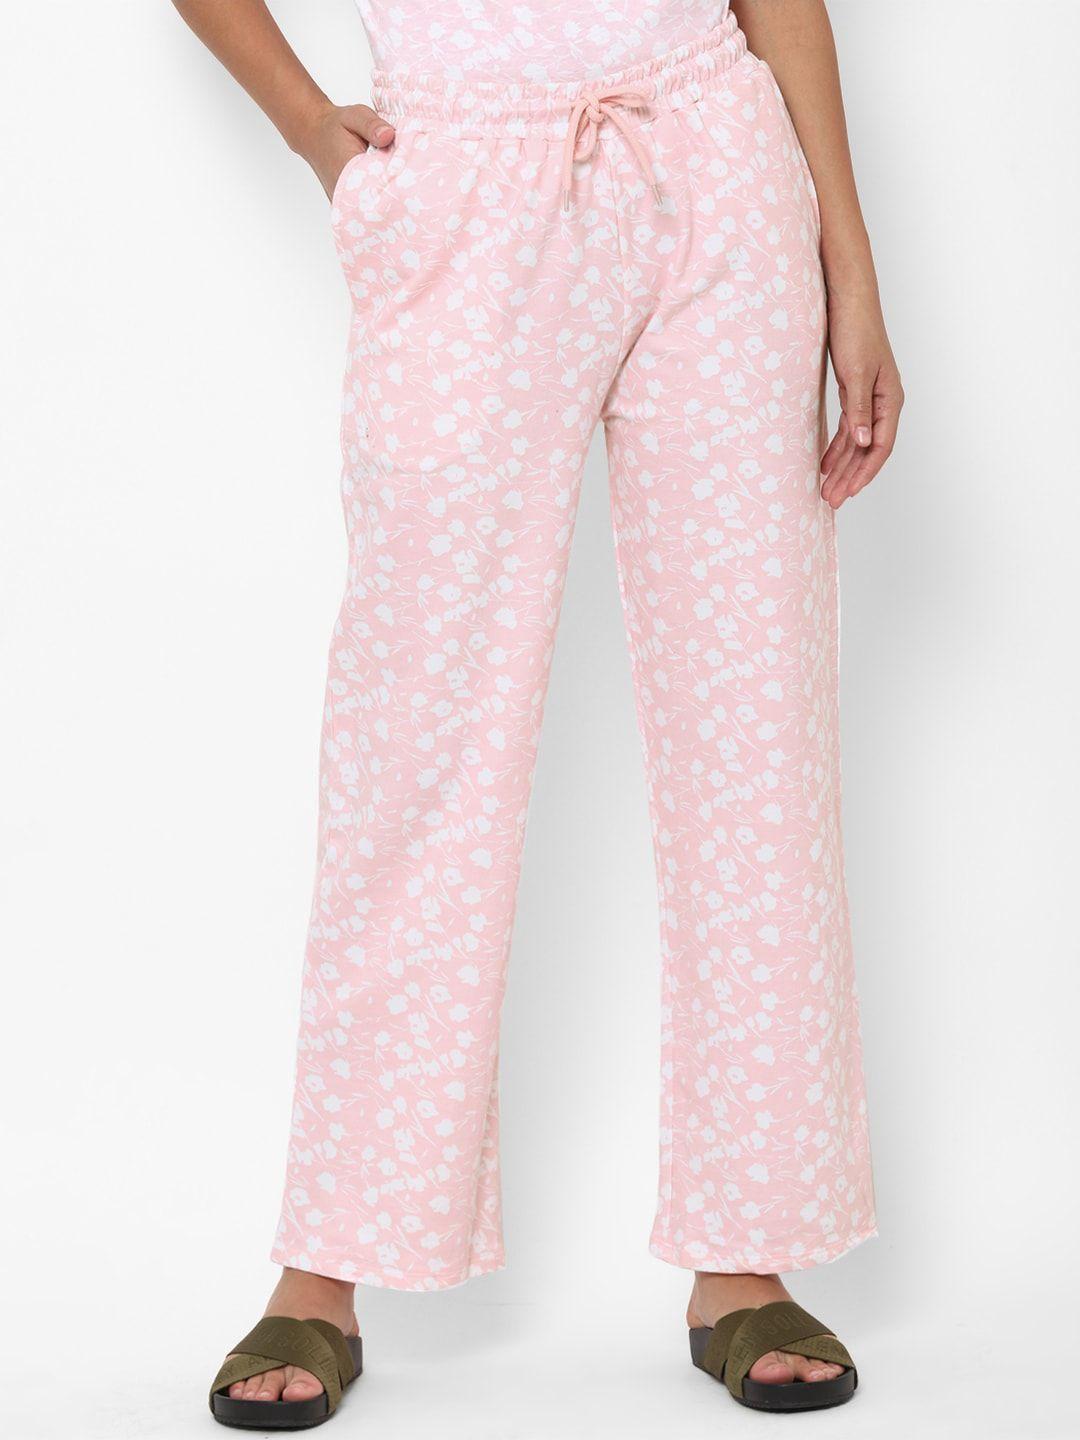 allen solly woman women pink floral printed 100% cotton parallel trousers